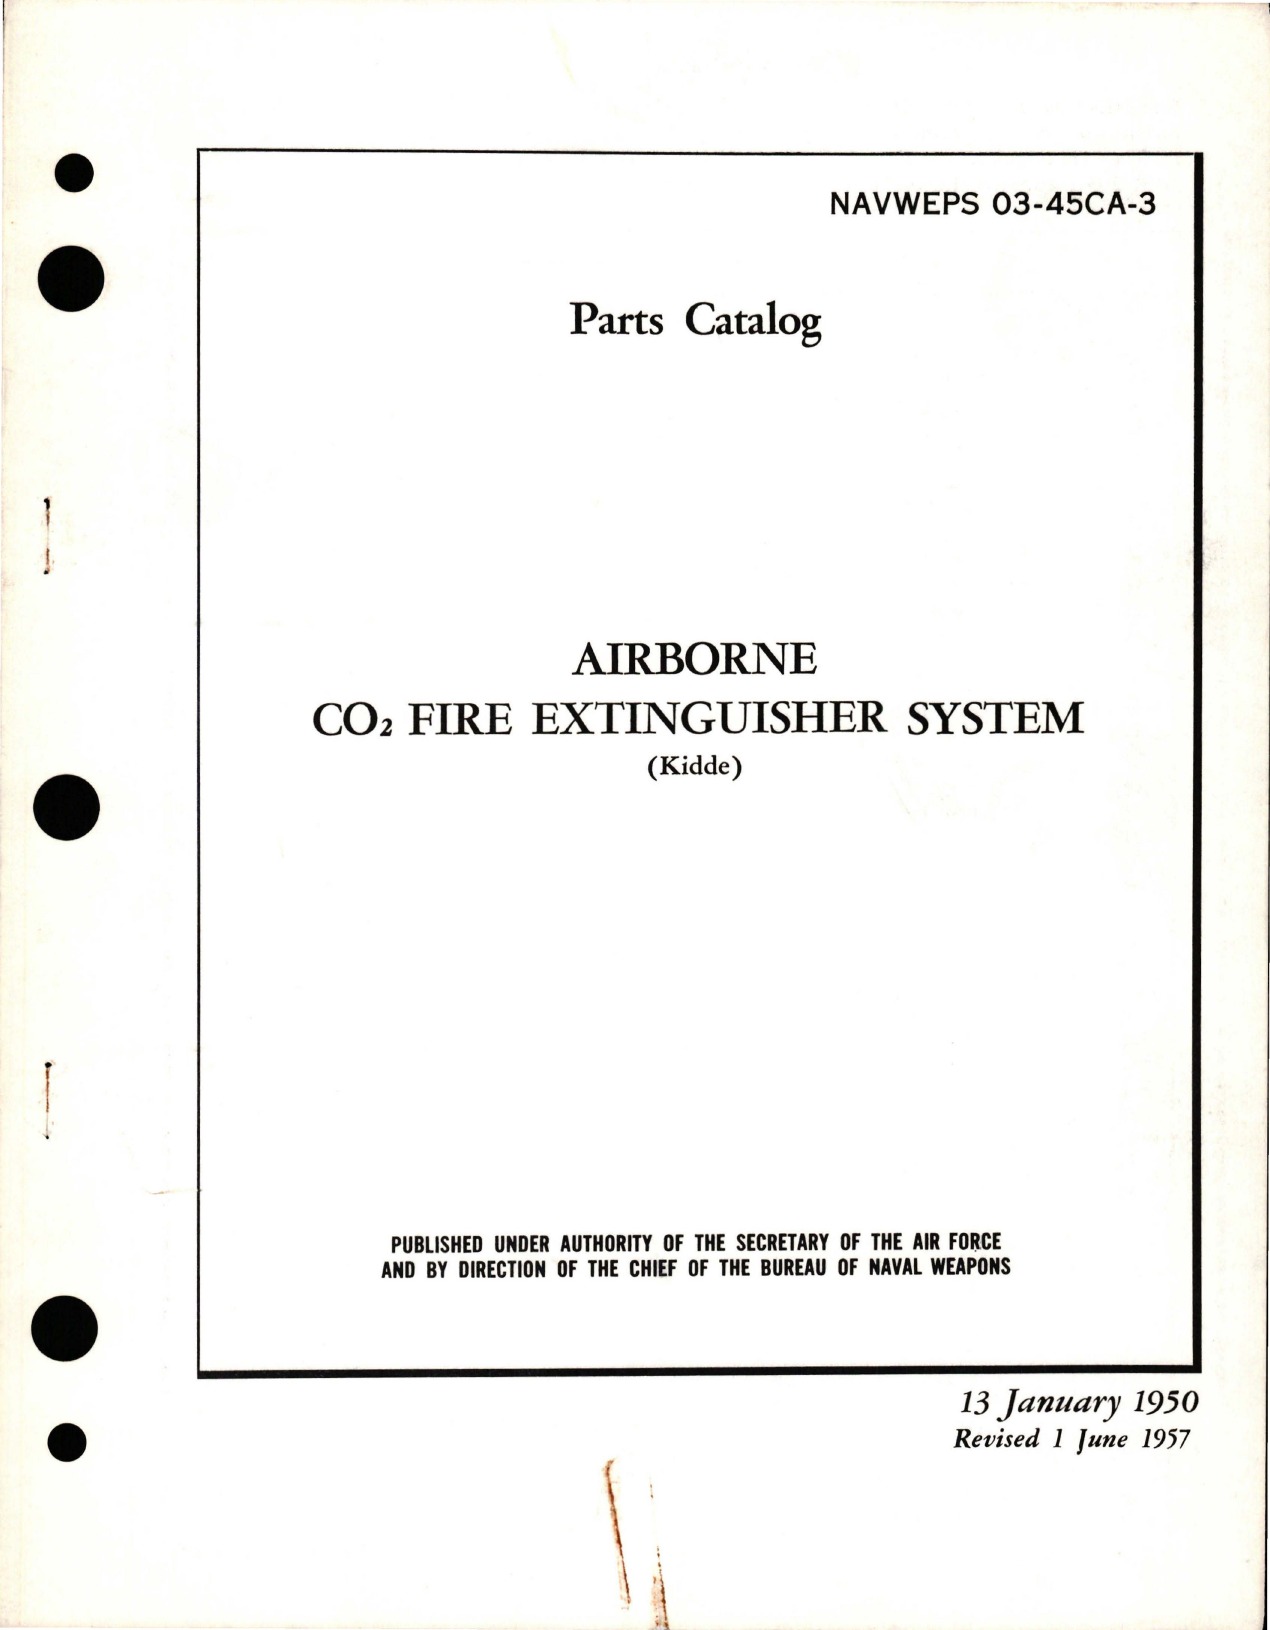 Sample page 1 from AirCorps Library document: Parts Catalog for Airborne CO2 Fire Extinguisher System 